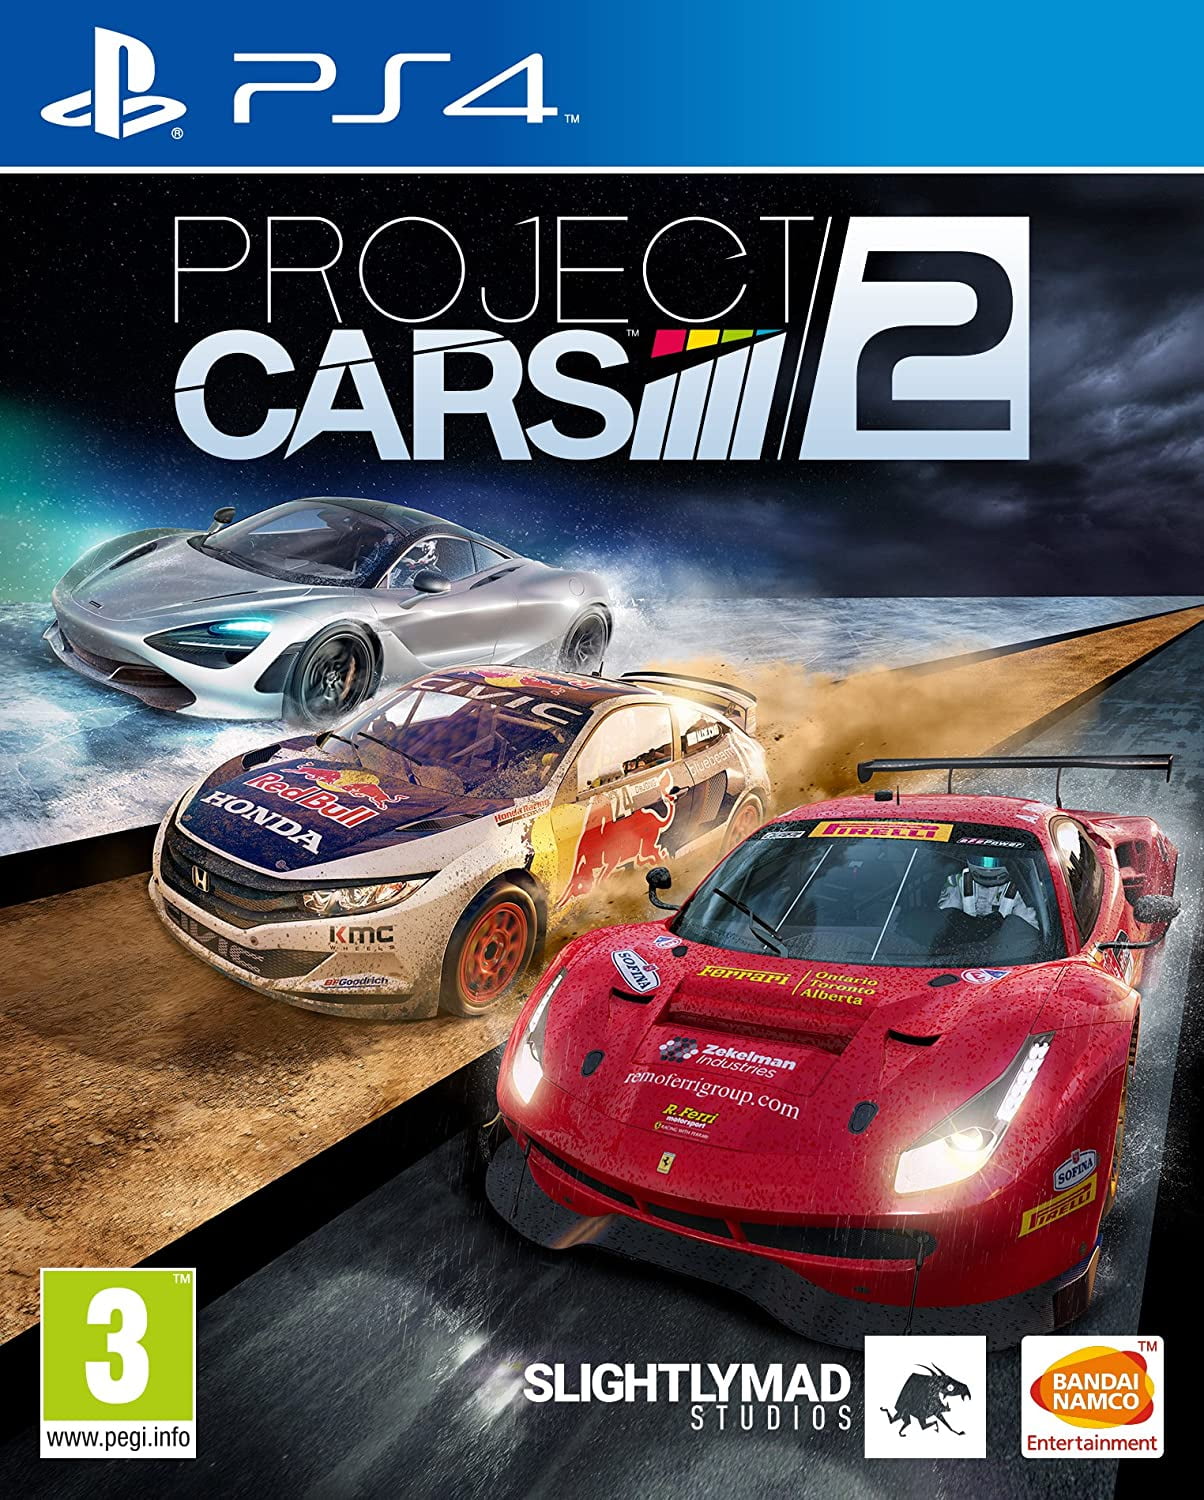 Project CARS Limited Edition (PS4) cheap - Price of $23.97